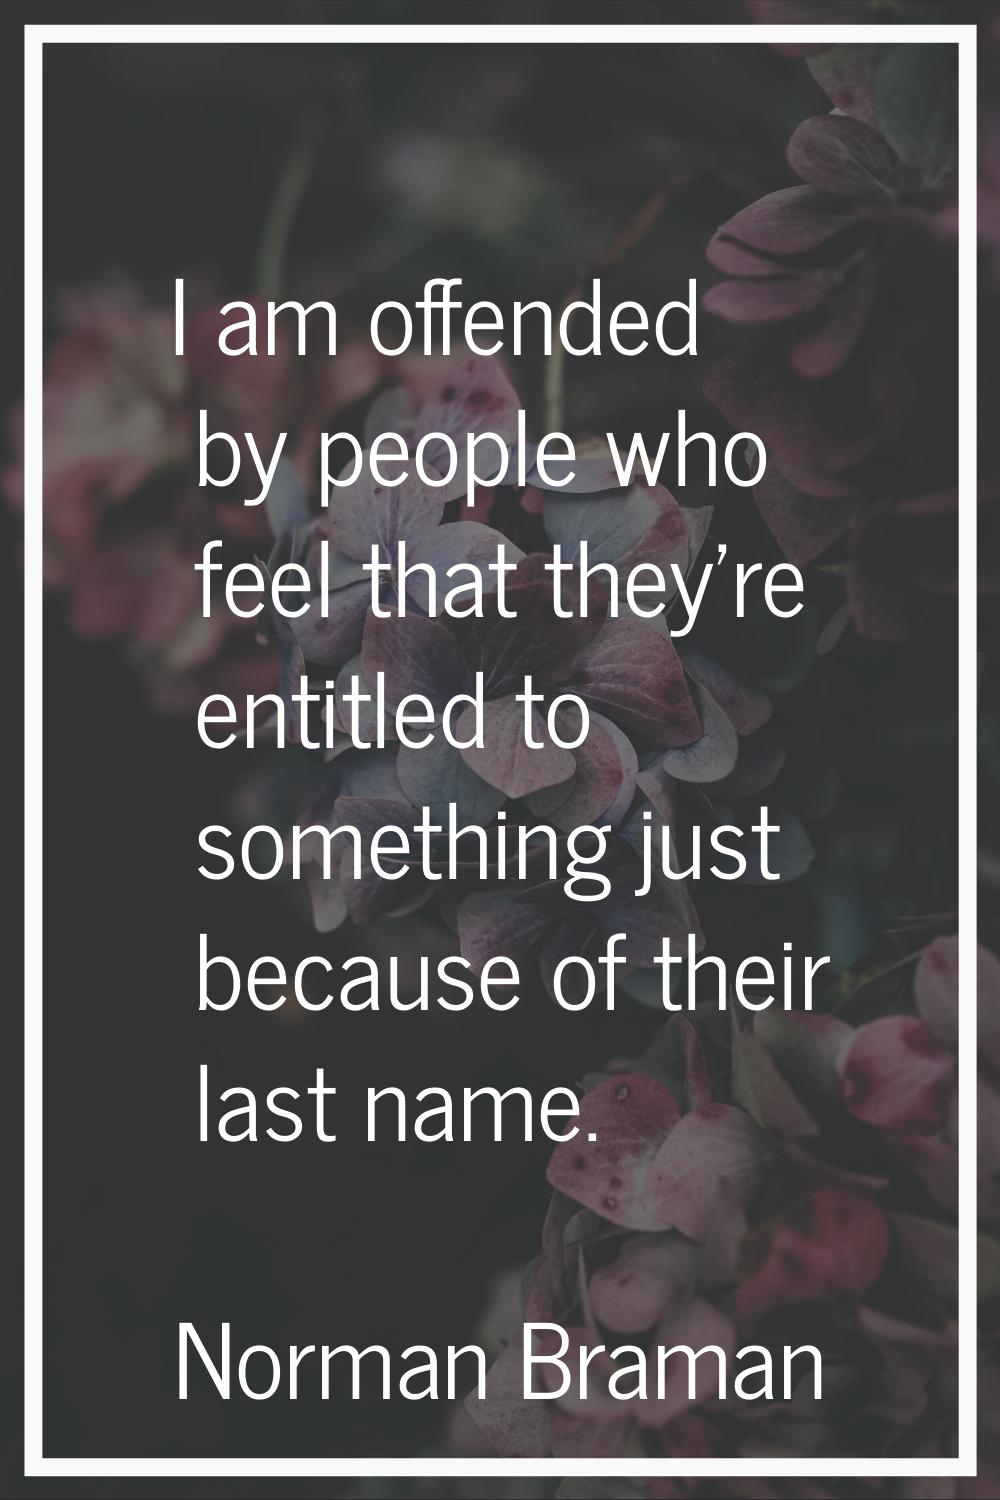 I am offended by people who feel that they're entitled to something just because of their last name